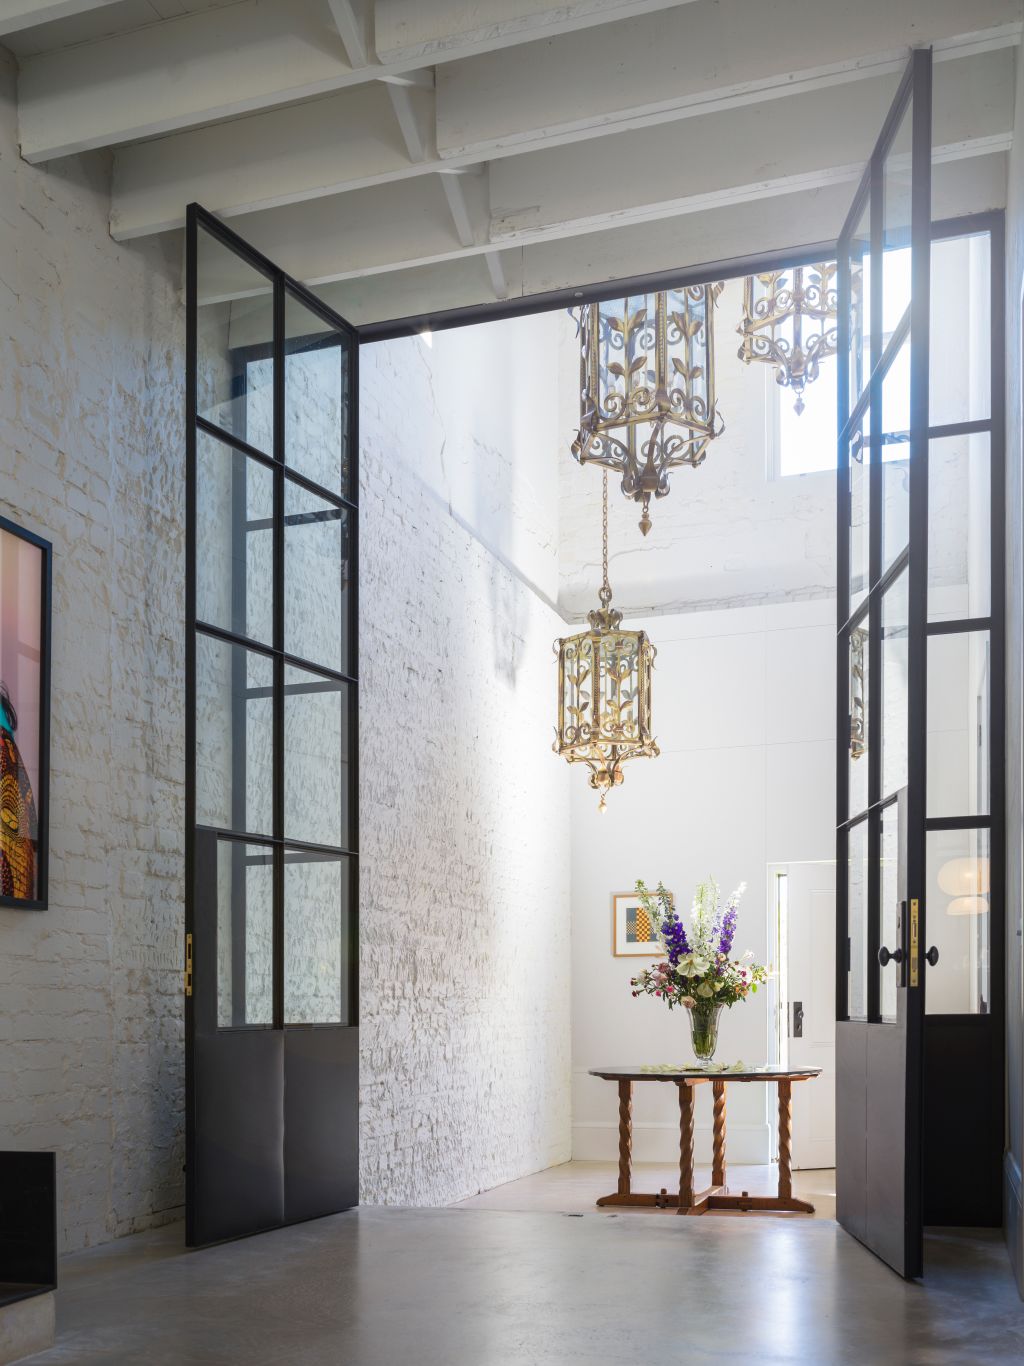 Soaring ceiling heights make for an epic entryway. Photo: Justin Alexander